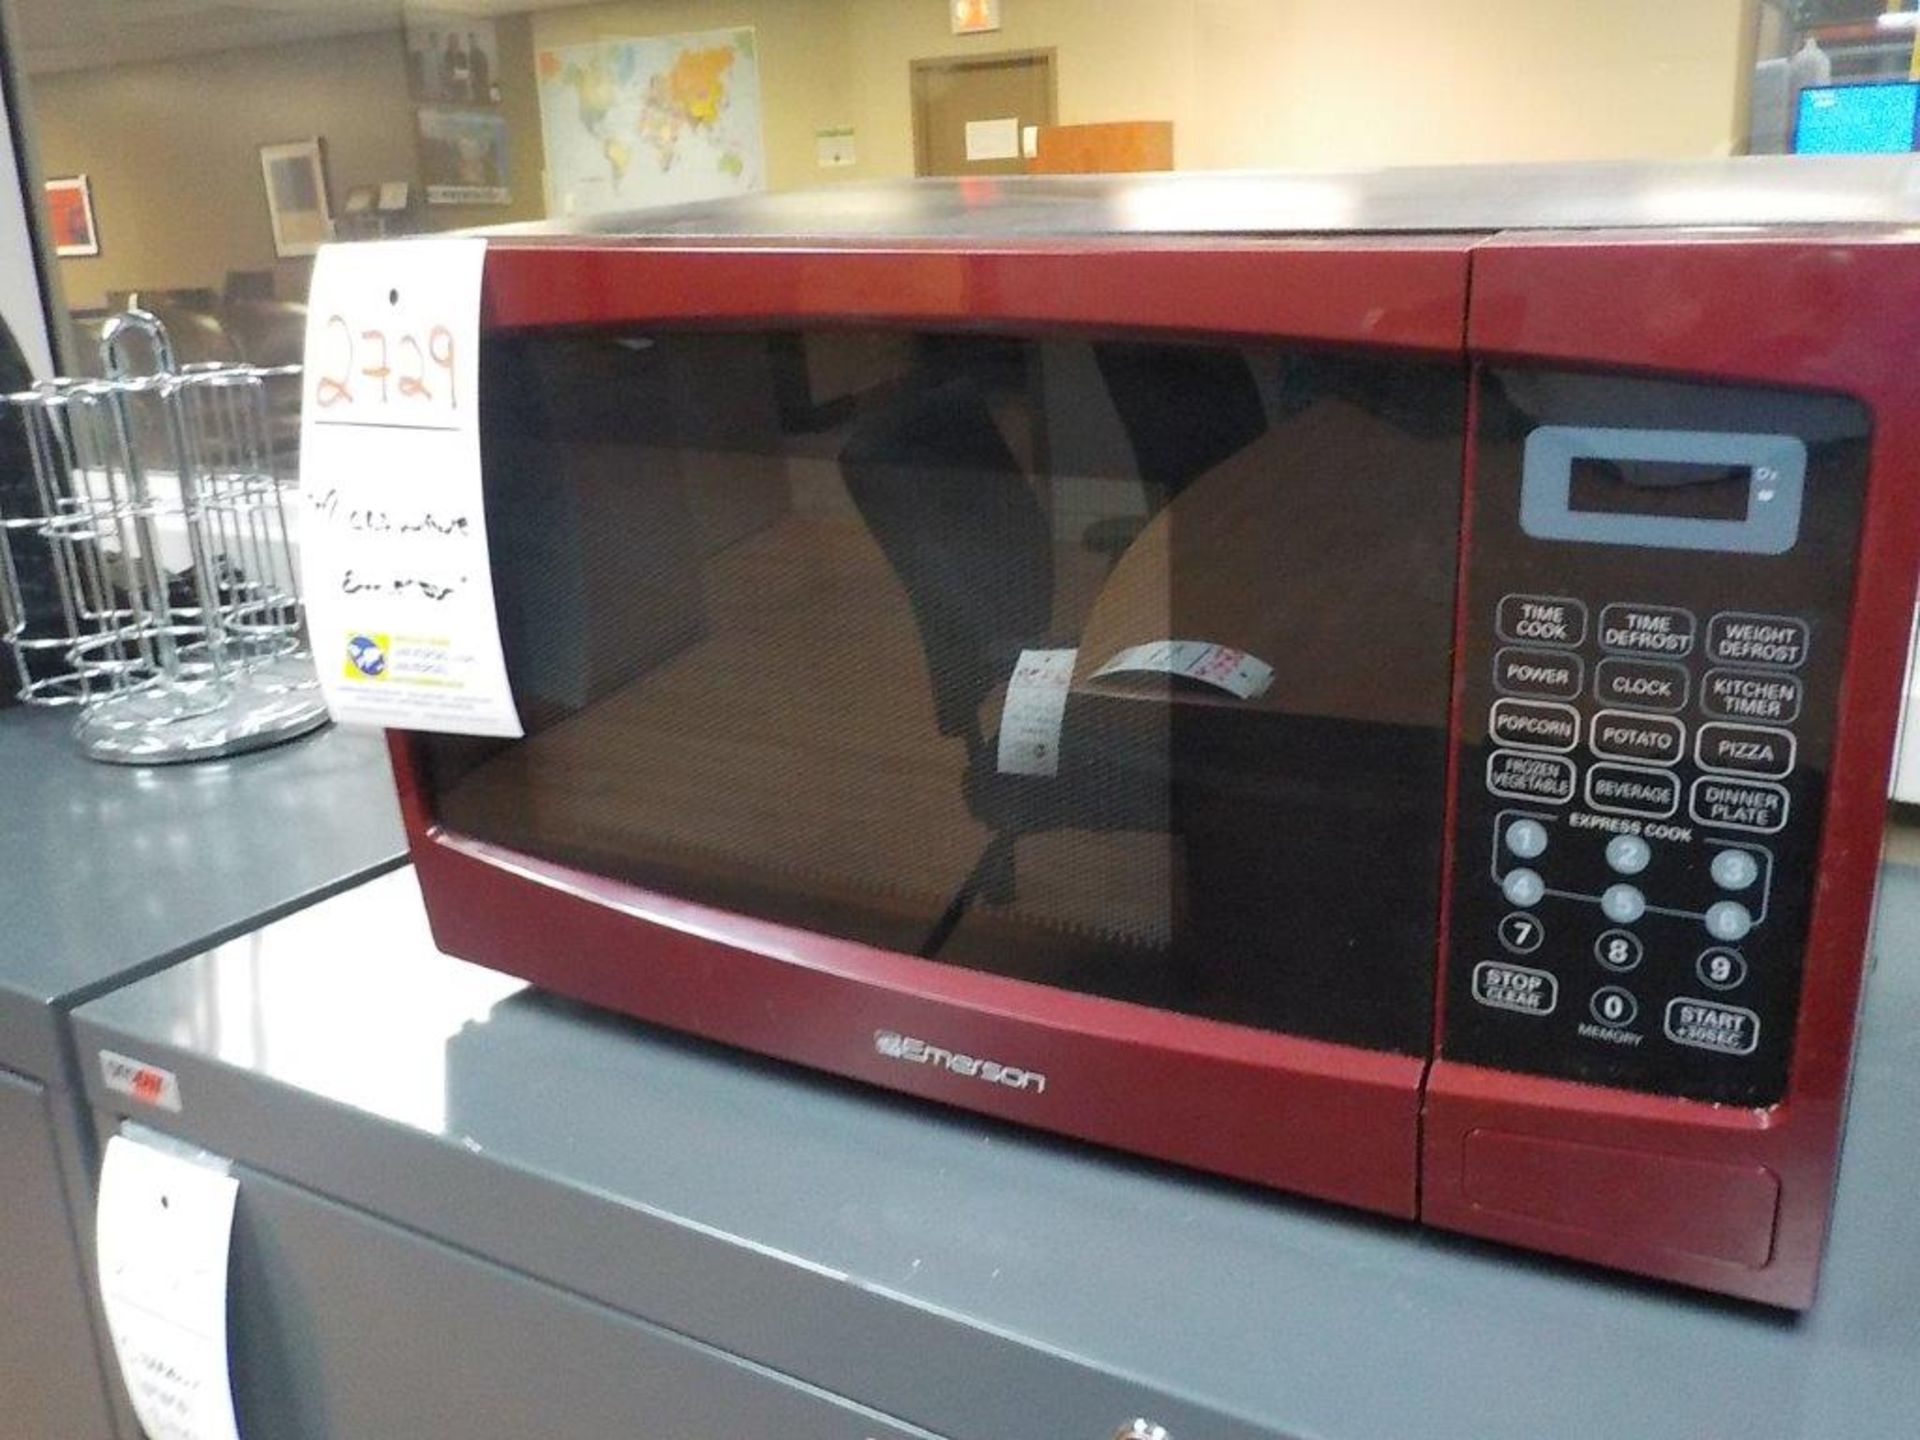 "EMERSON" MICROWAVE OVEN